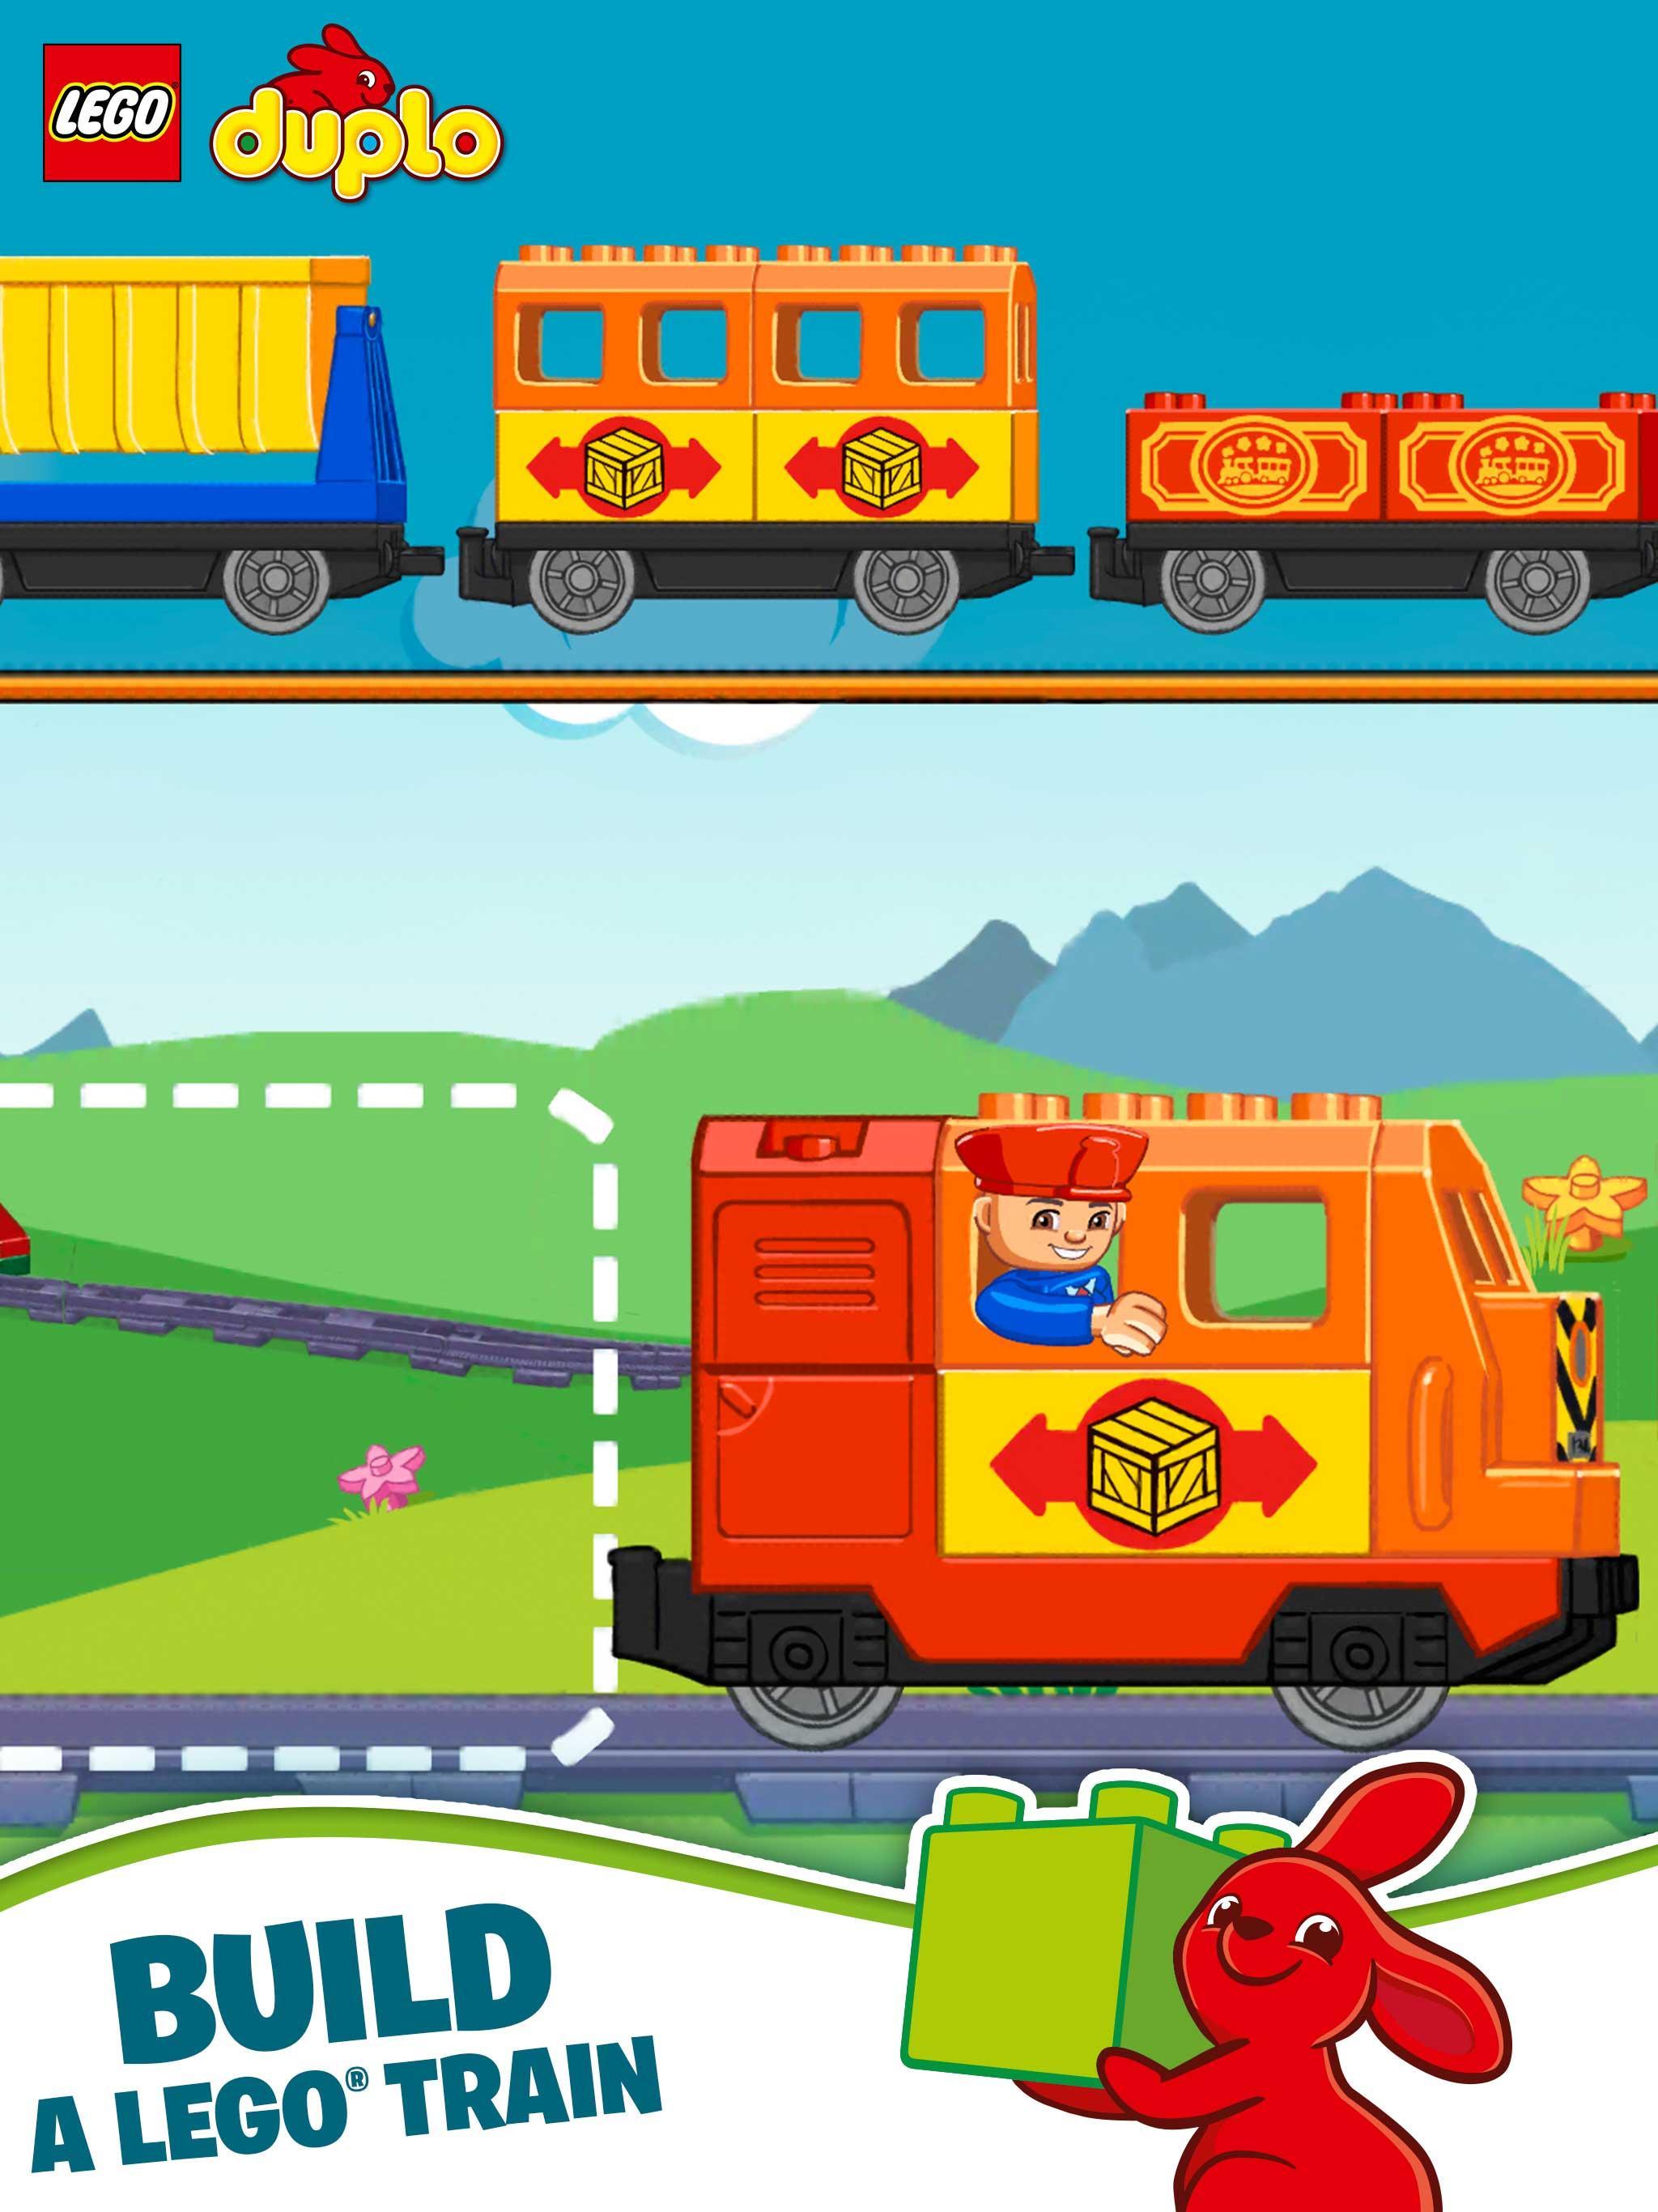 LEGO® DUPLO® Train for Android - APK Download